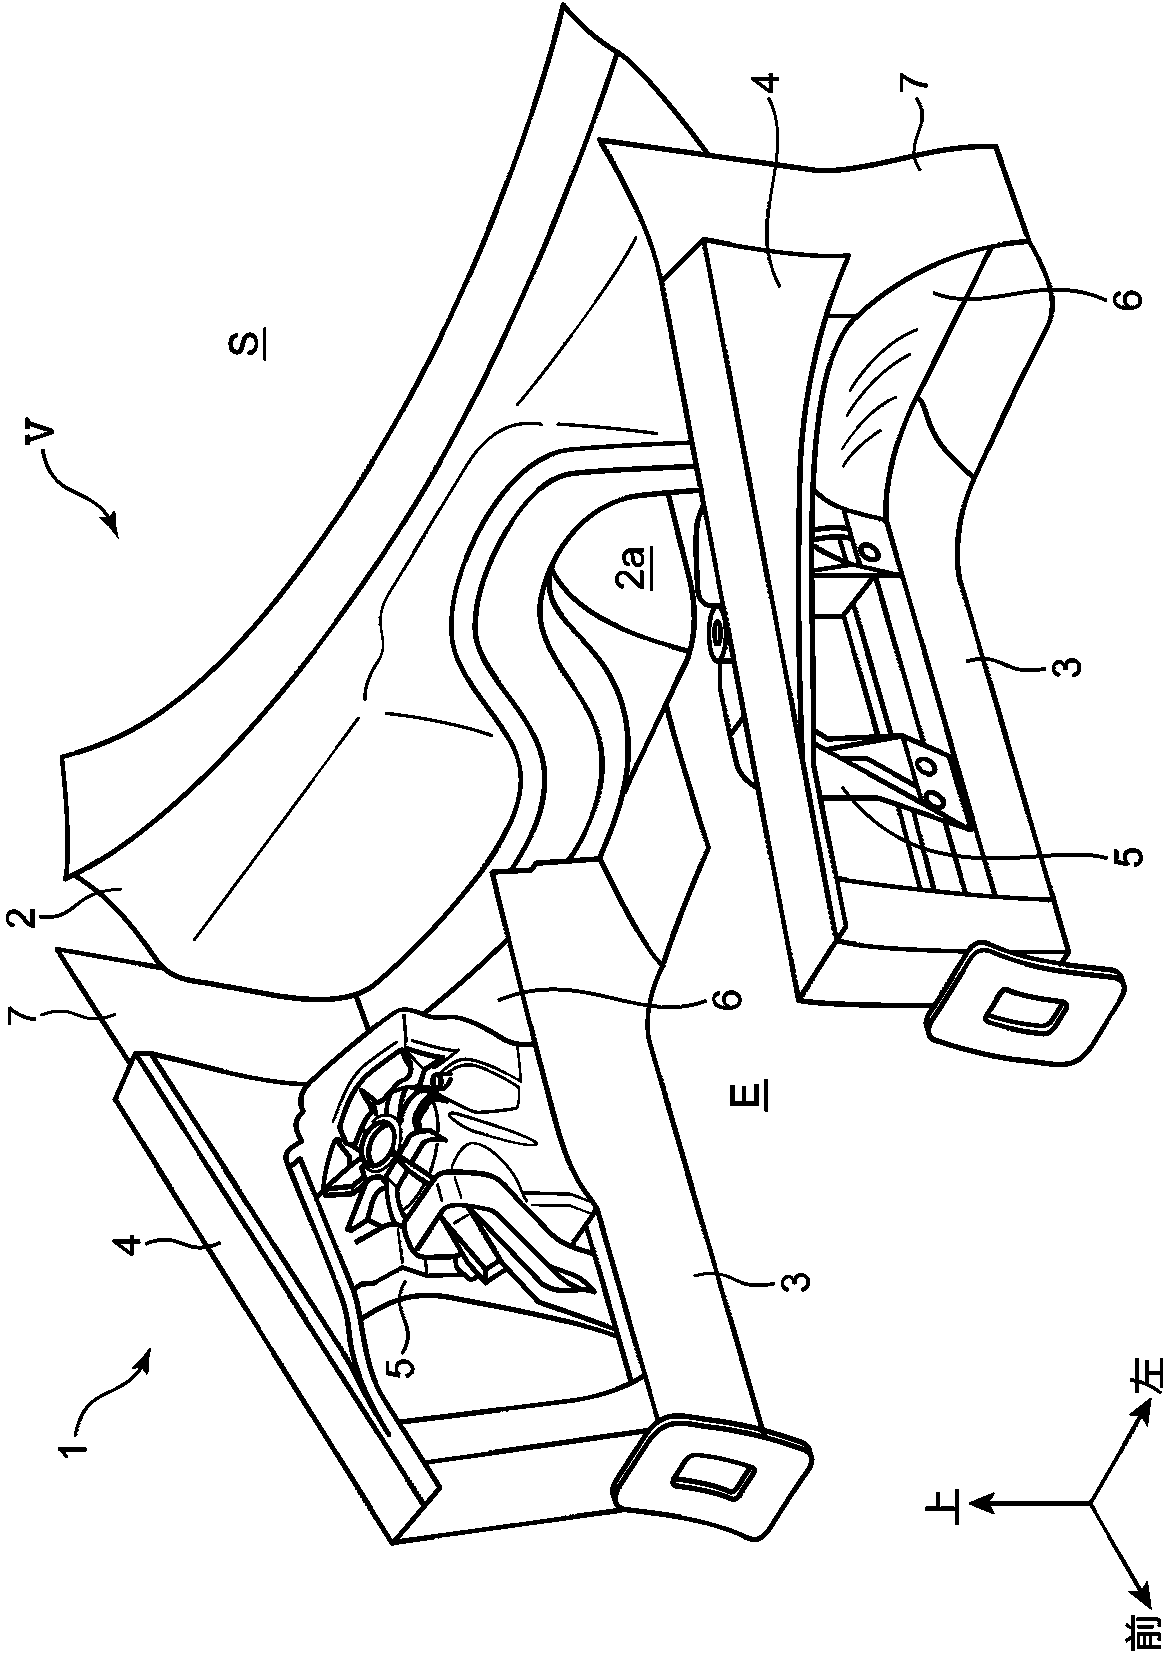 Front vehicle body structure for vehicle